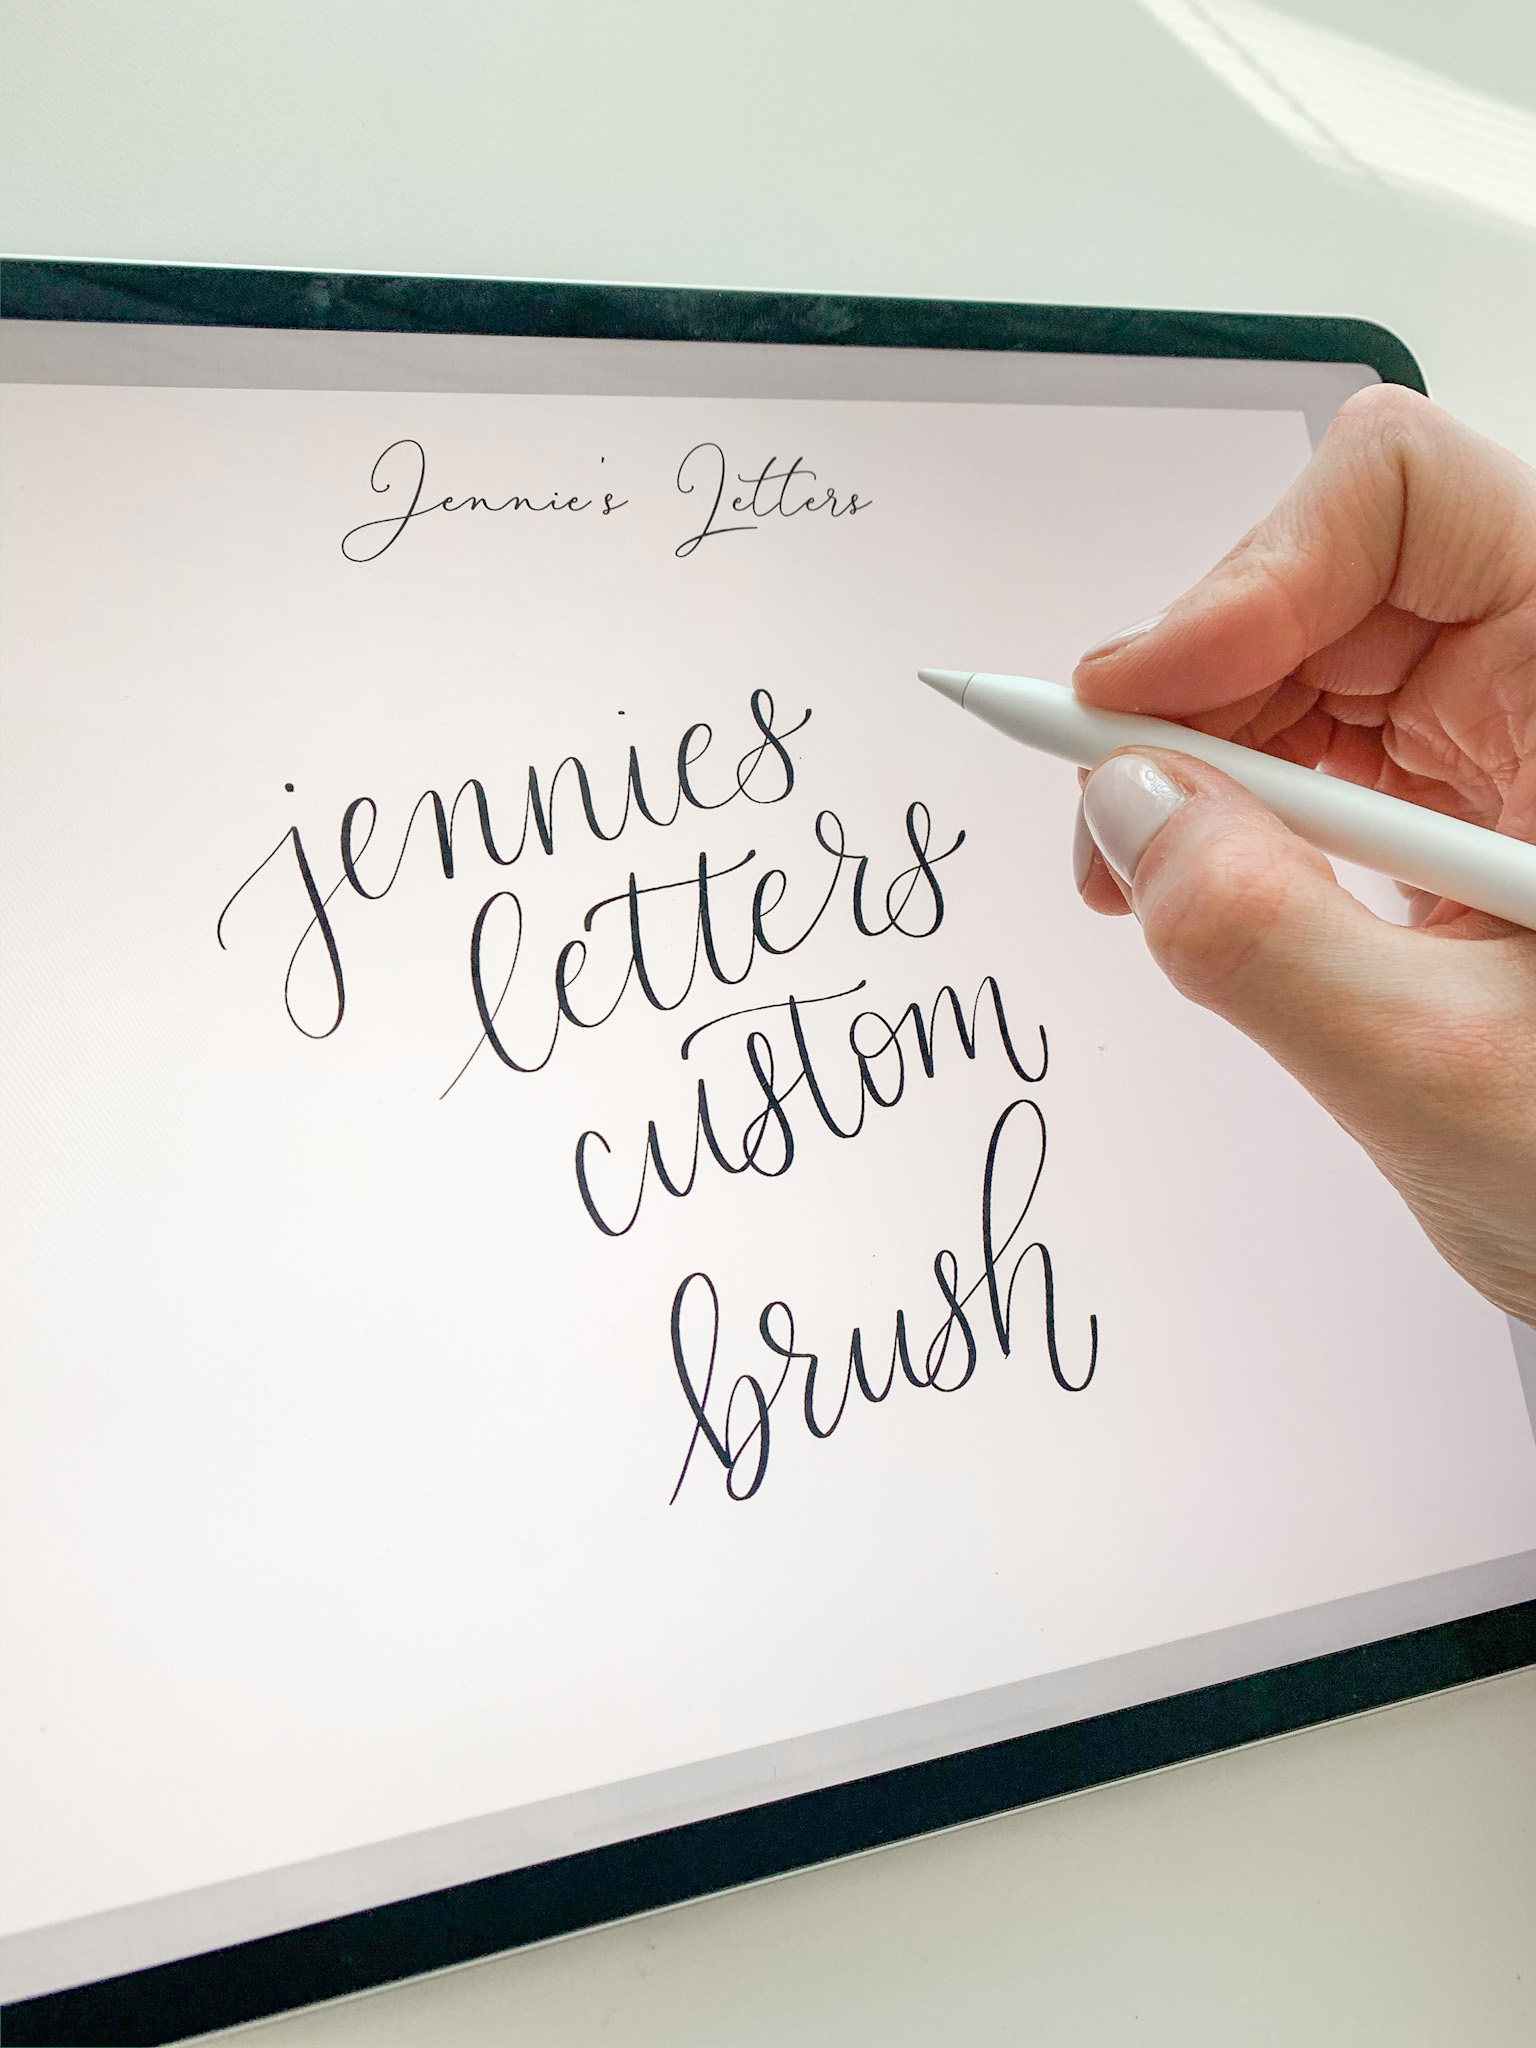 17 beautiful calligraphy brushes for procreate - Free Brushes for